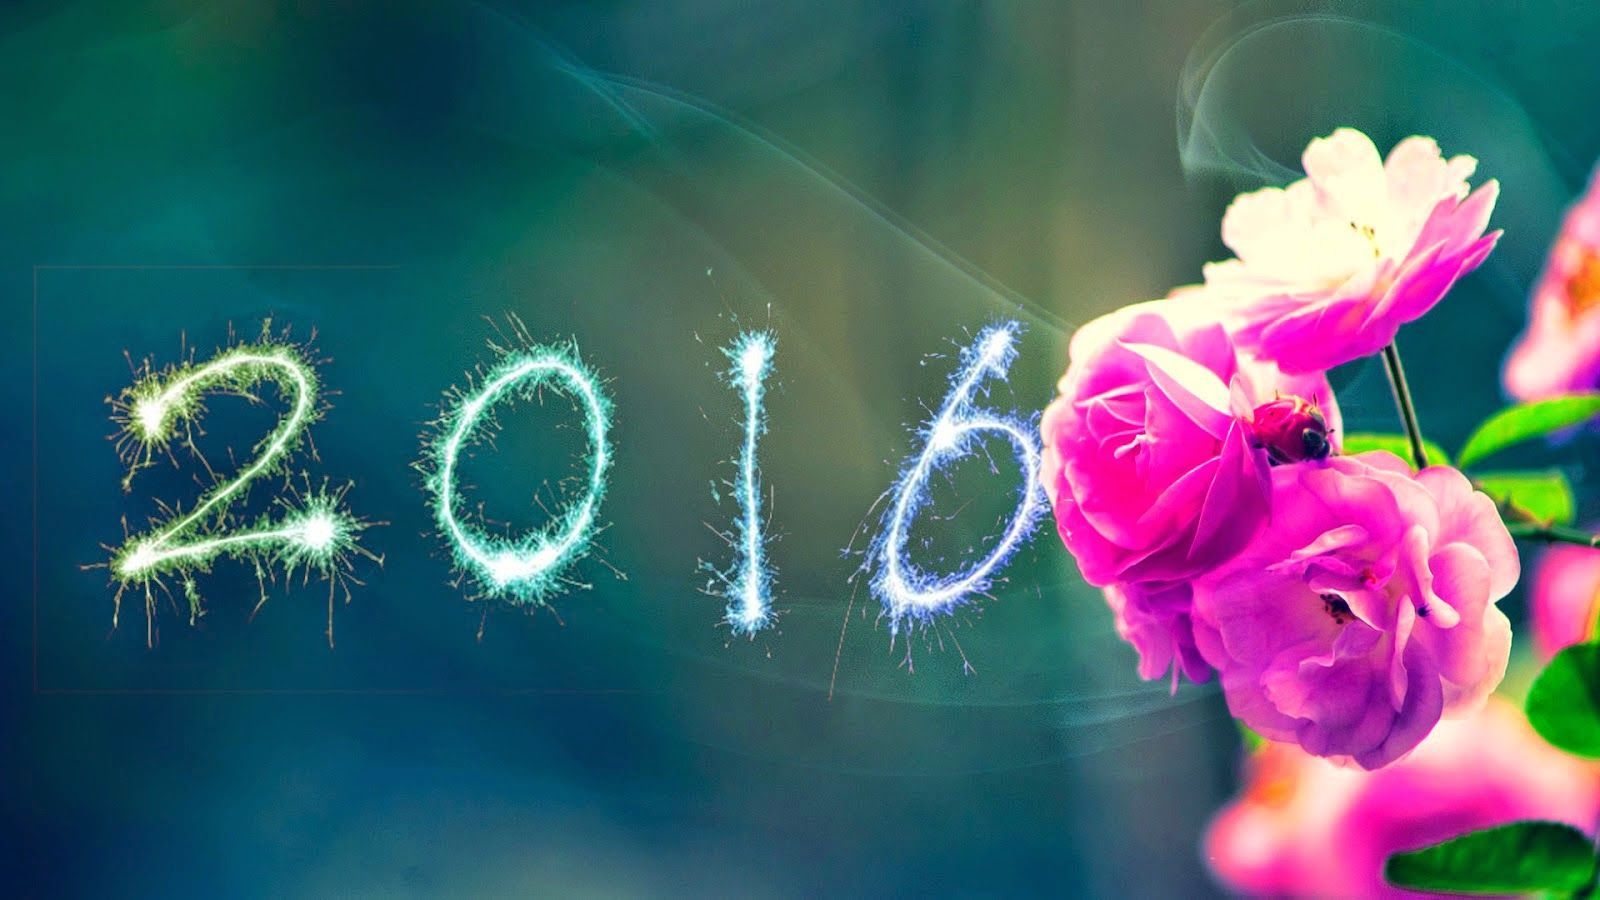 Happy*} New Year HD Wallpaper and Photos free Download